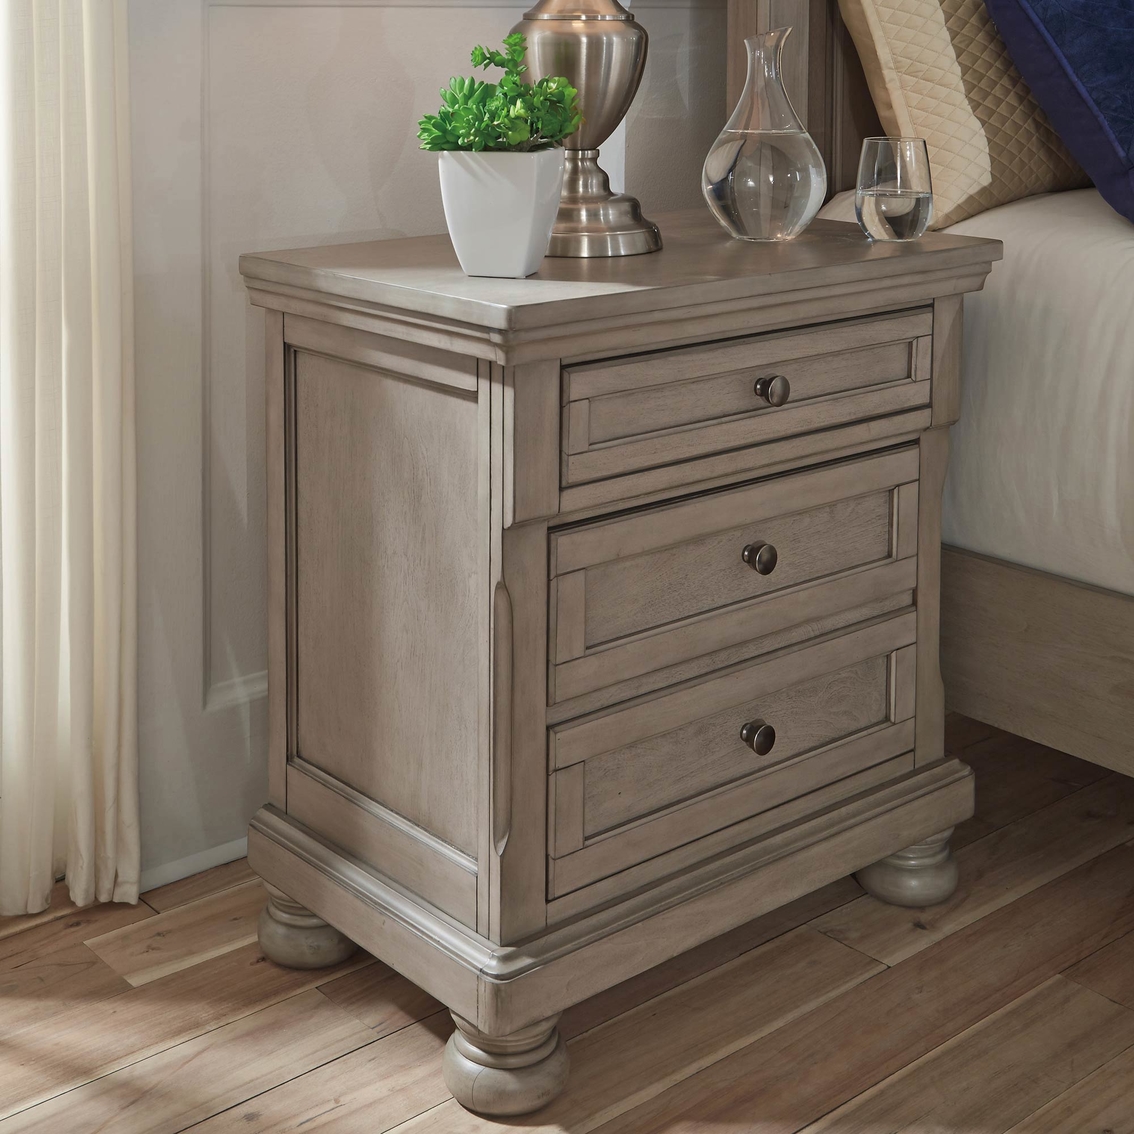 Signature Design by Ashley Lettner 2 Drawer Nightstand - Image 2 of 4